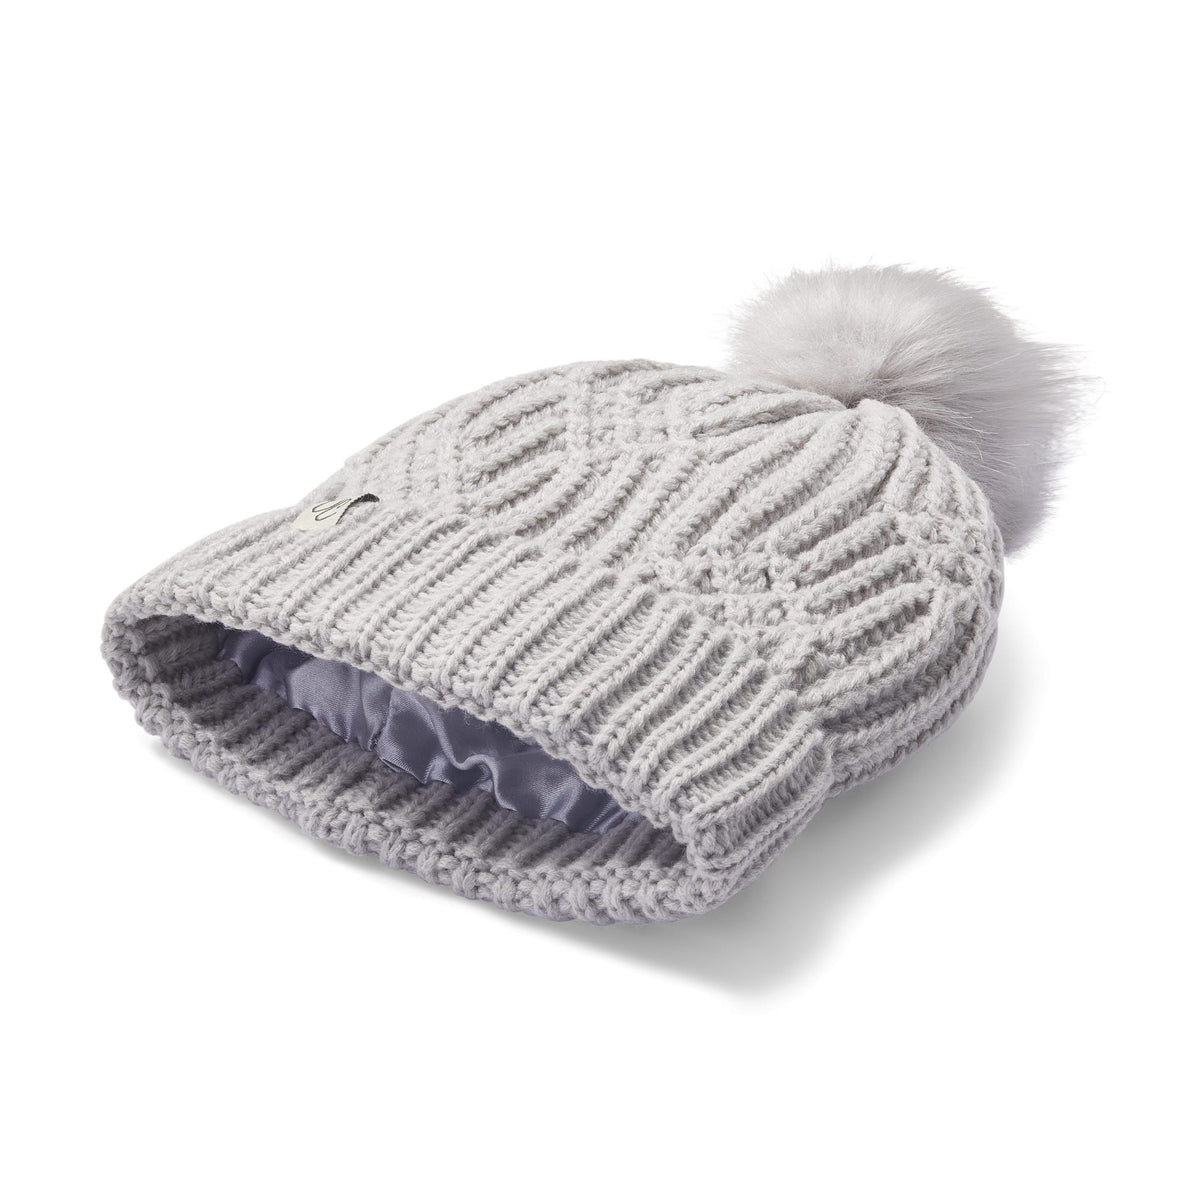 Only Curls Satin Lined Knitted Beanie Hat - Grey with Pom Pom - Only Curls